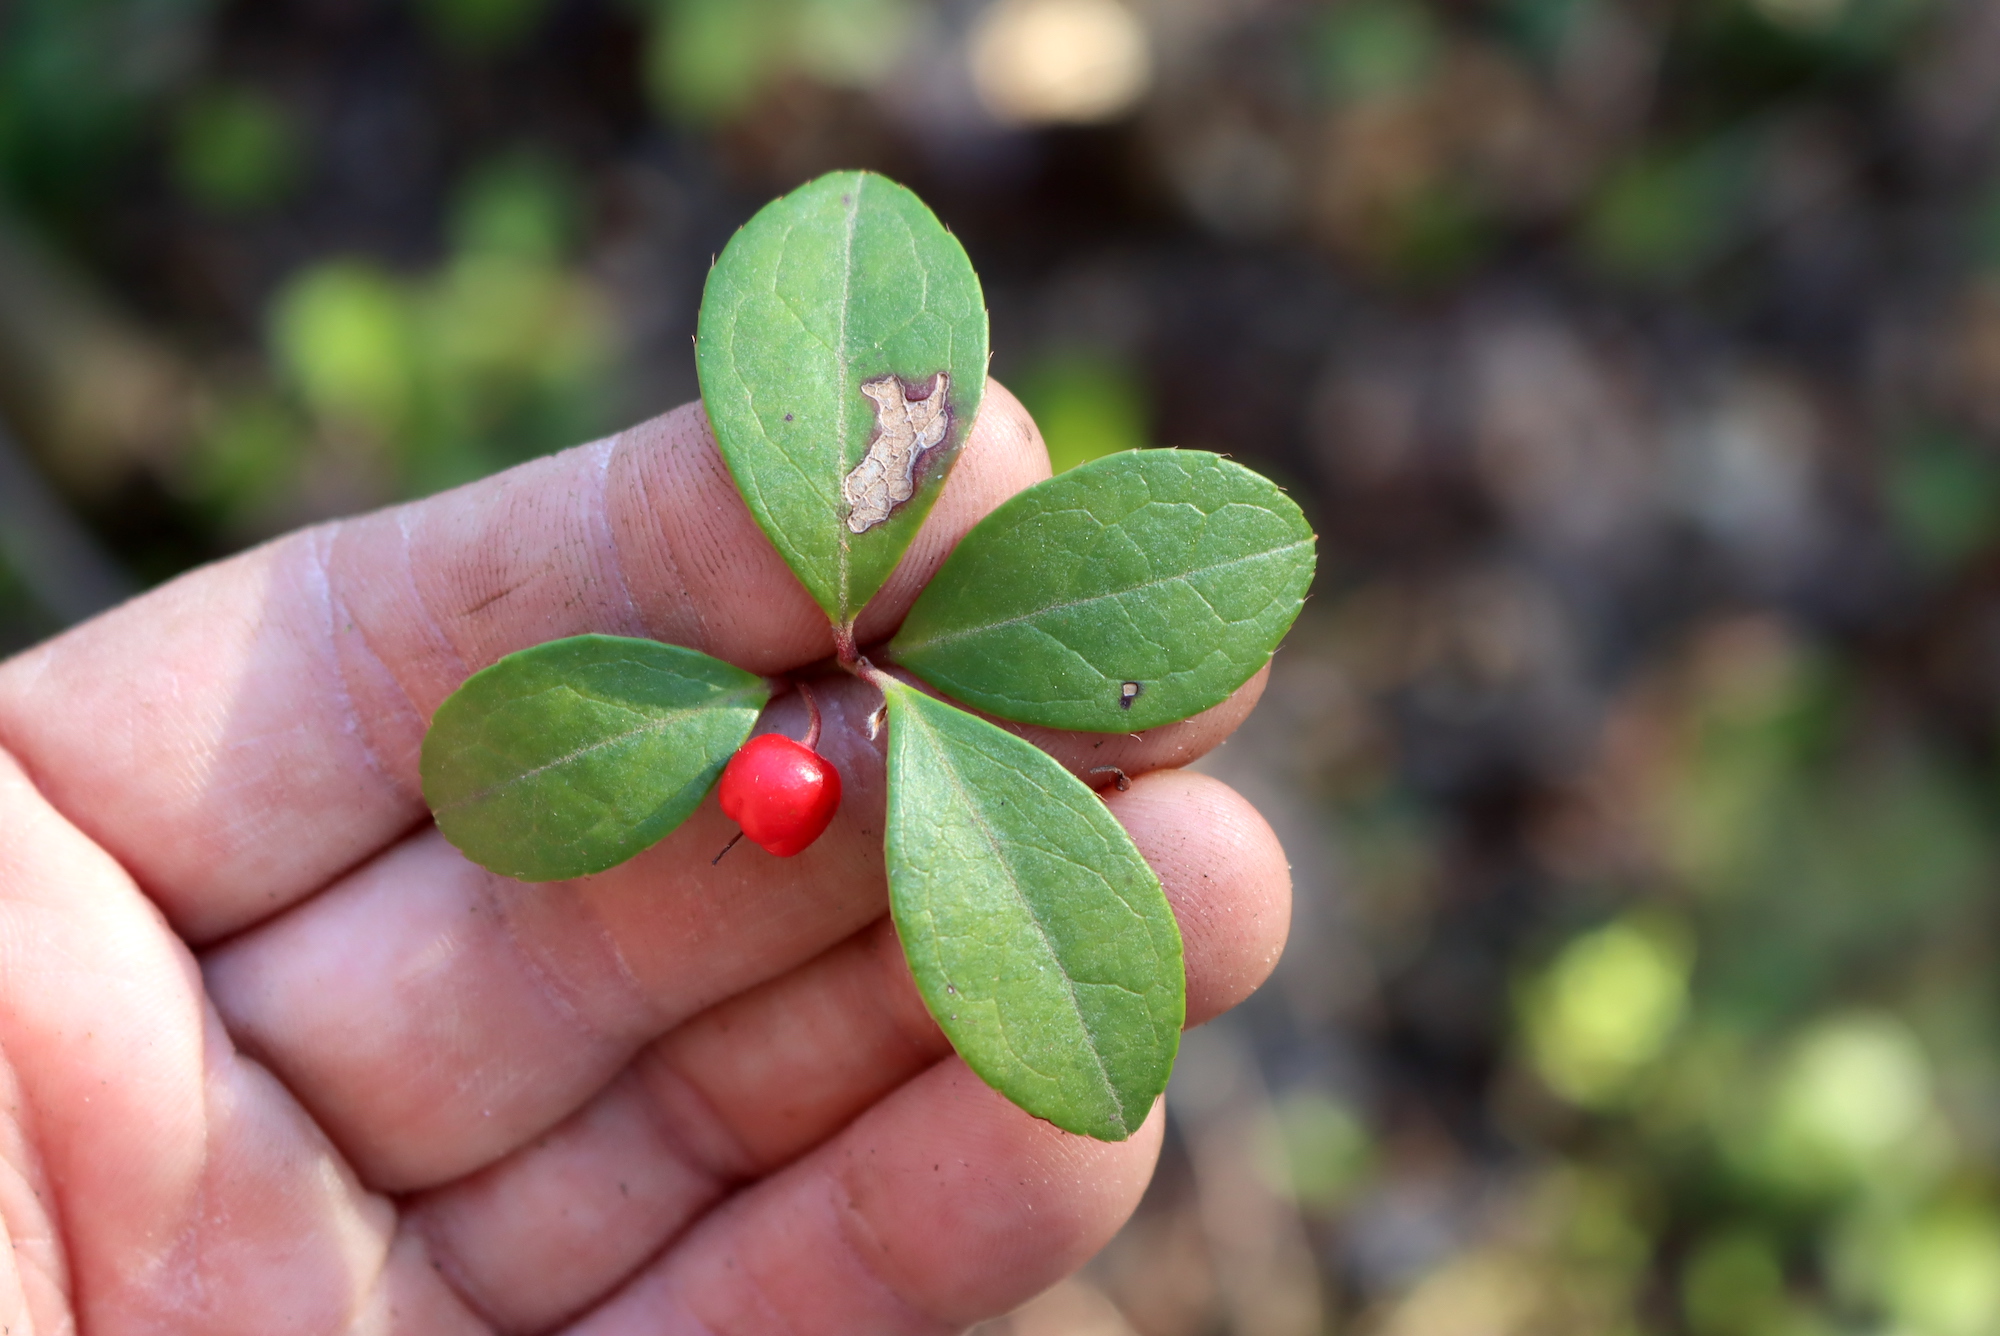 Identifying Teaberry